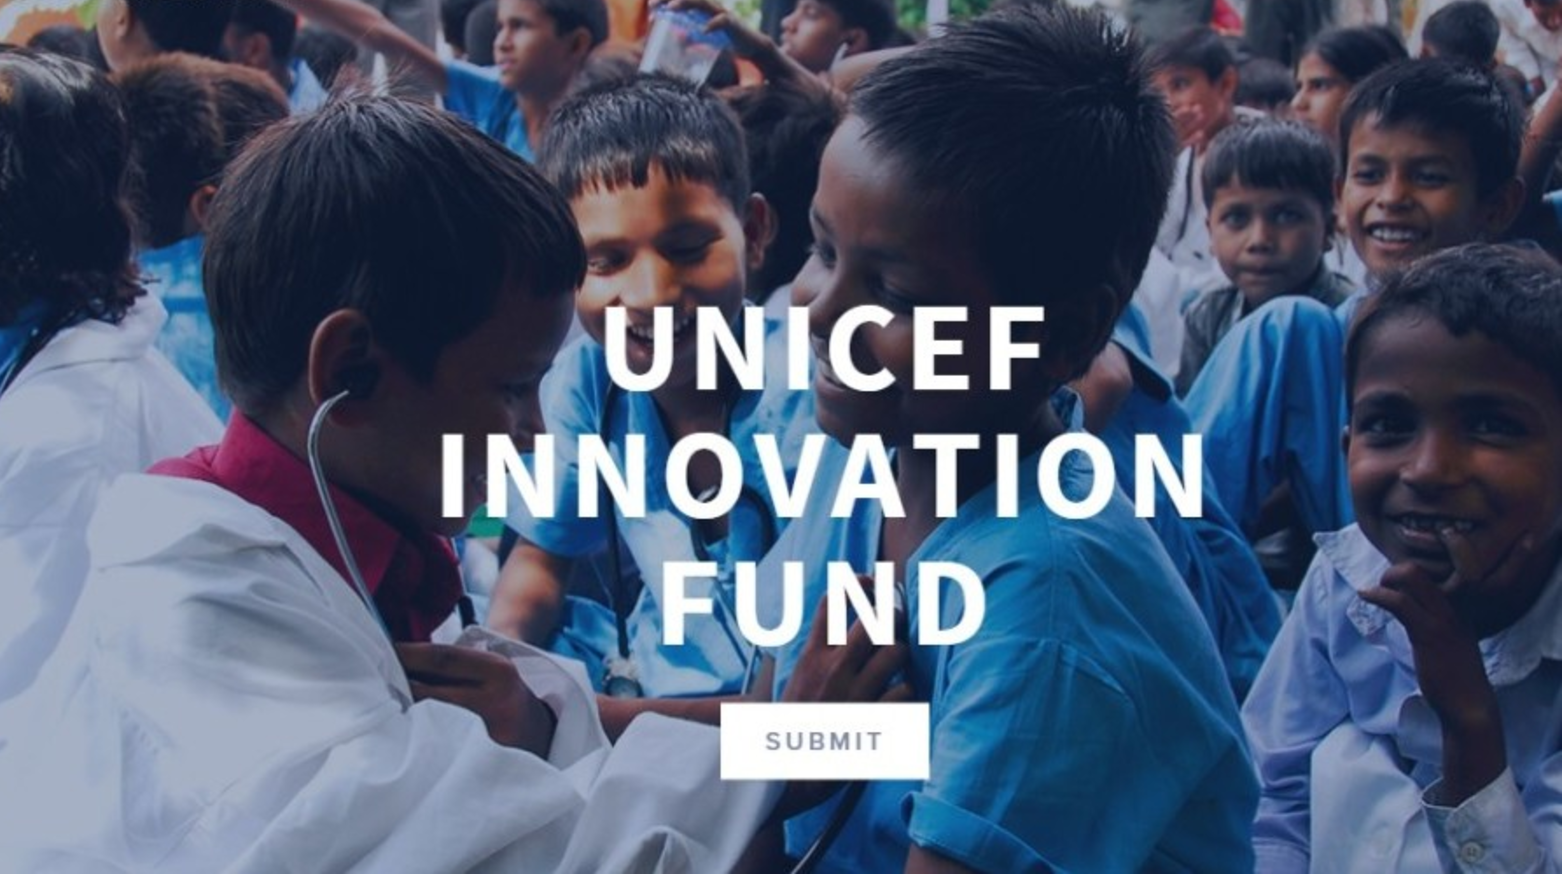 UNICEF Innovation Fund: UNICEF fire funding is back!